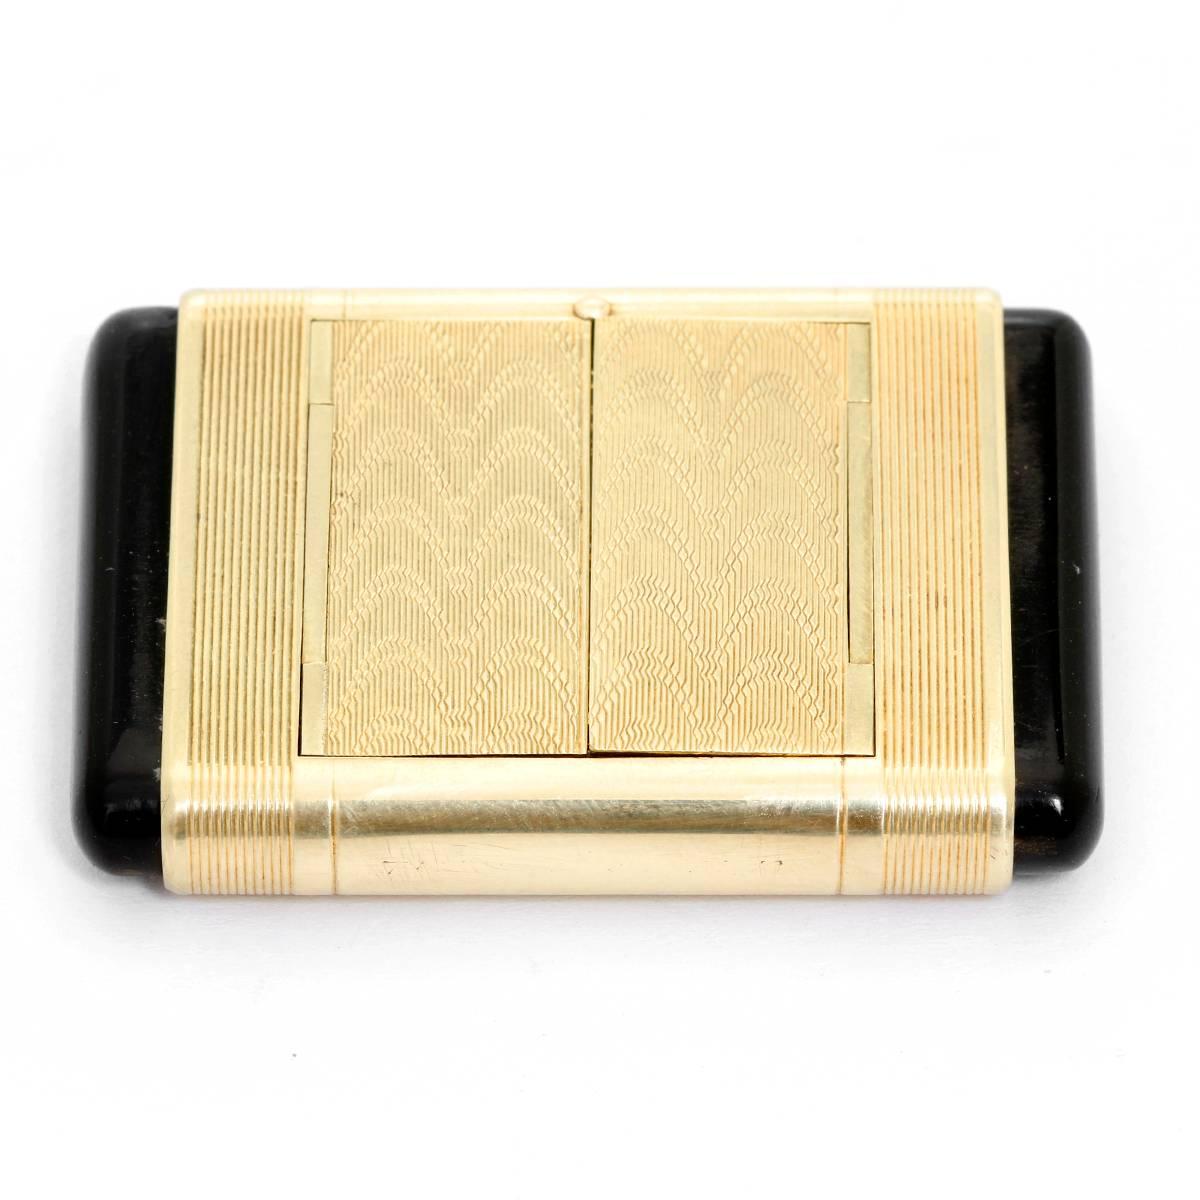 Vintage Art Deco Cartier 14K Gold & Black Enamel Shutter Watch -  Manual winding. 14K Yellow Gold rectangular case with Black Enamel push buttons.  Art Deco Zig zag motif engraved on it. White dial with Arabic numerals. Pre-owned with original